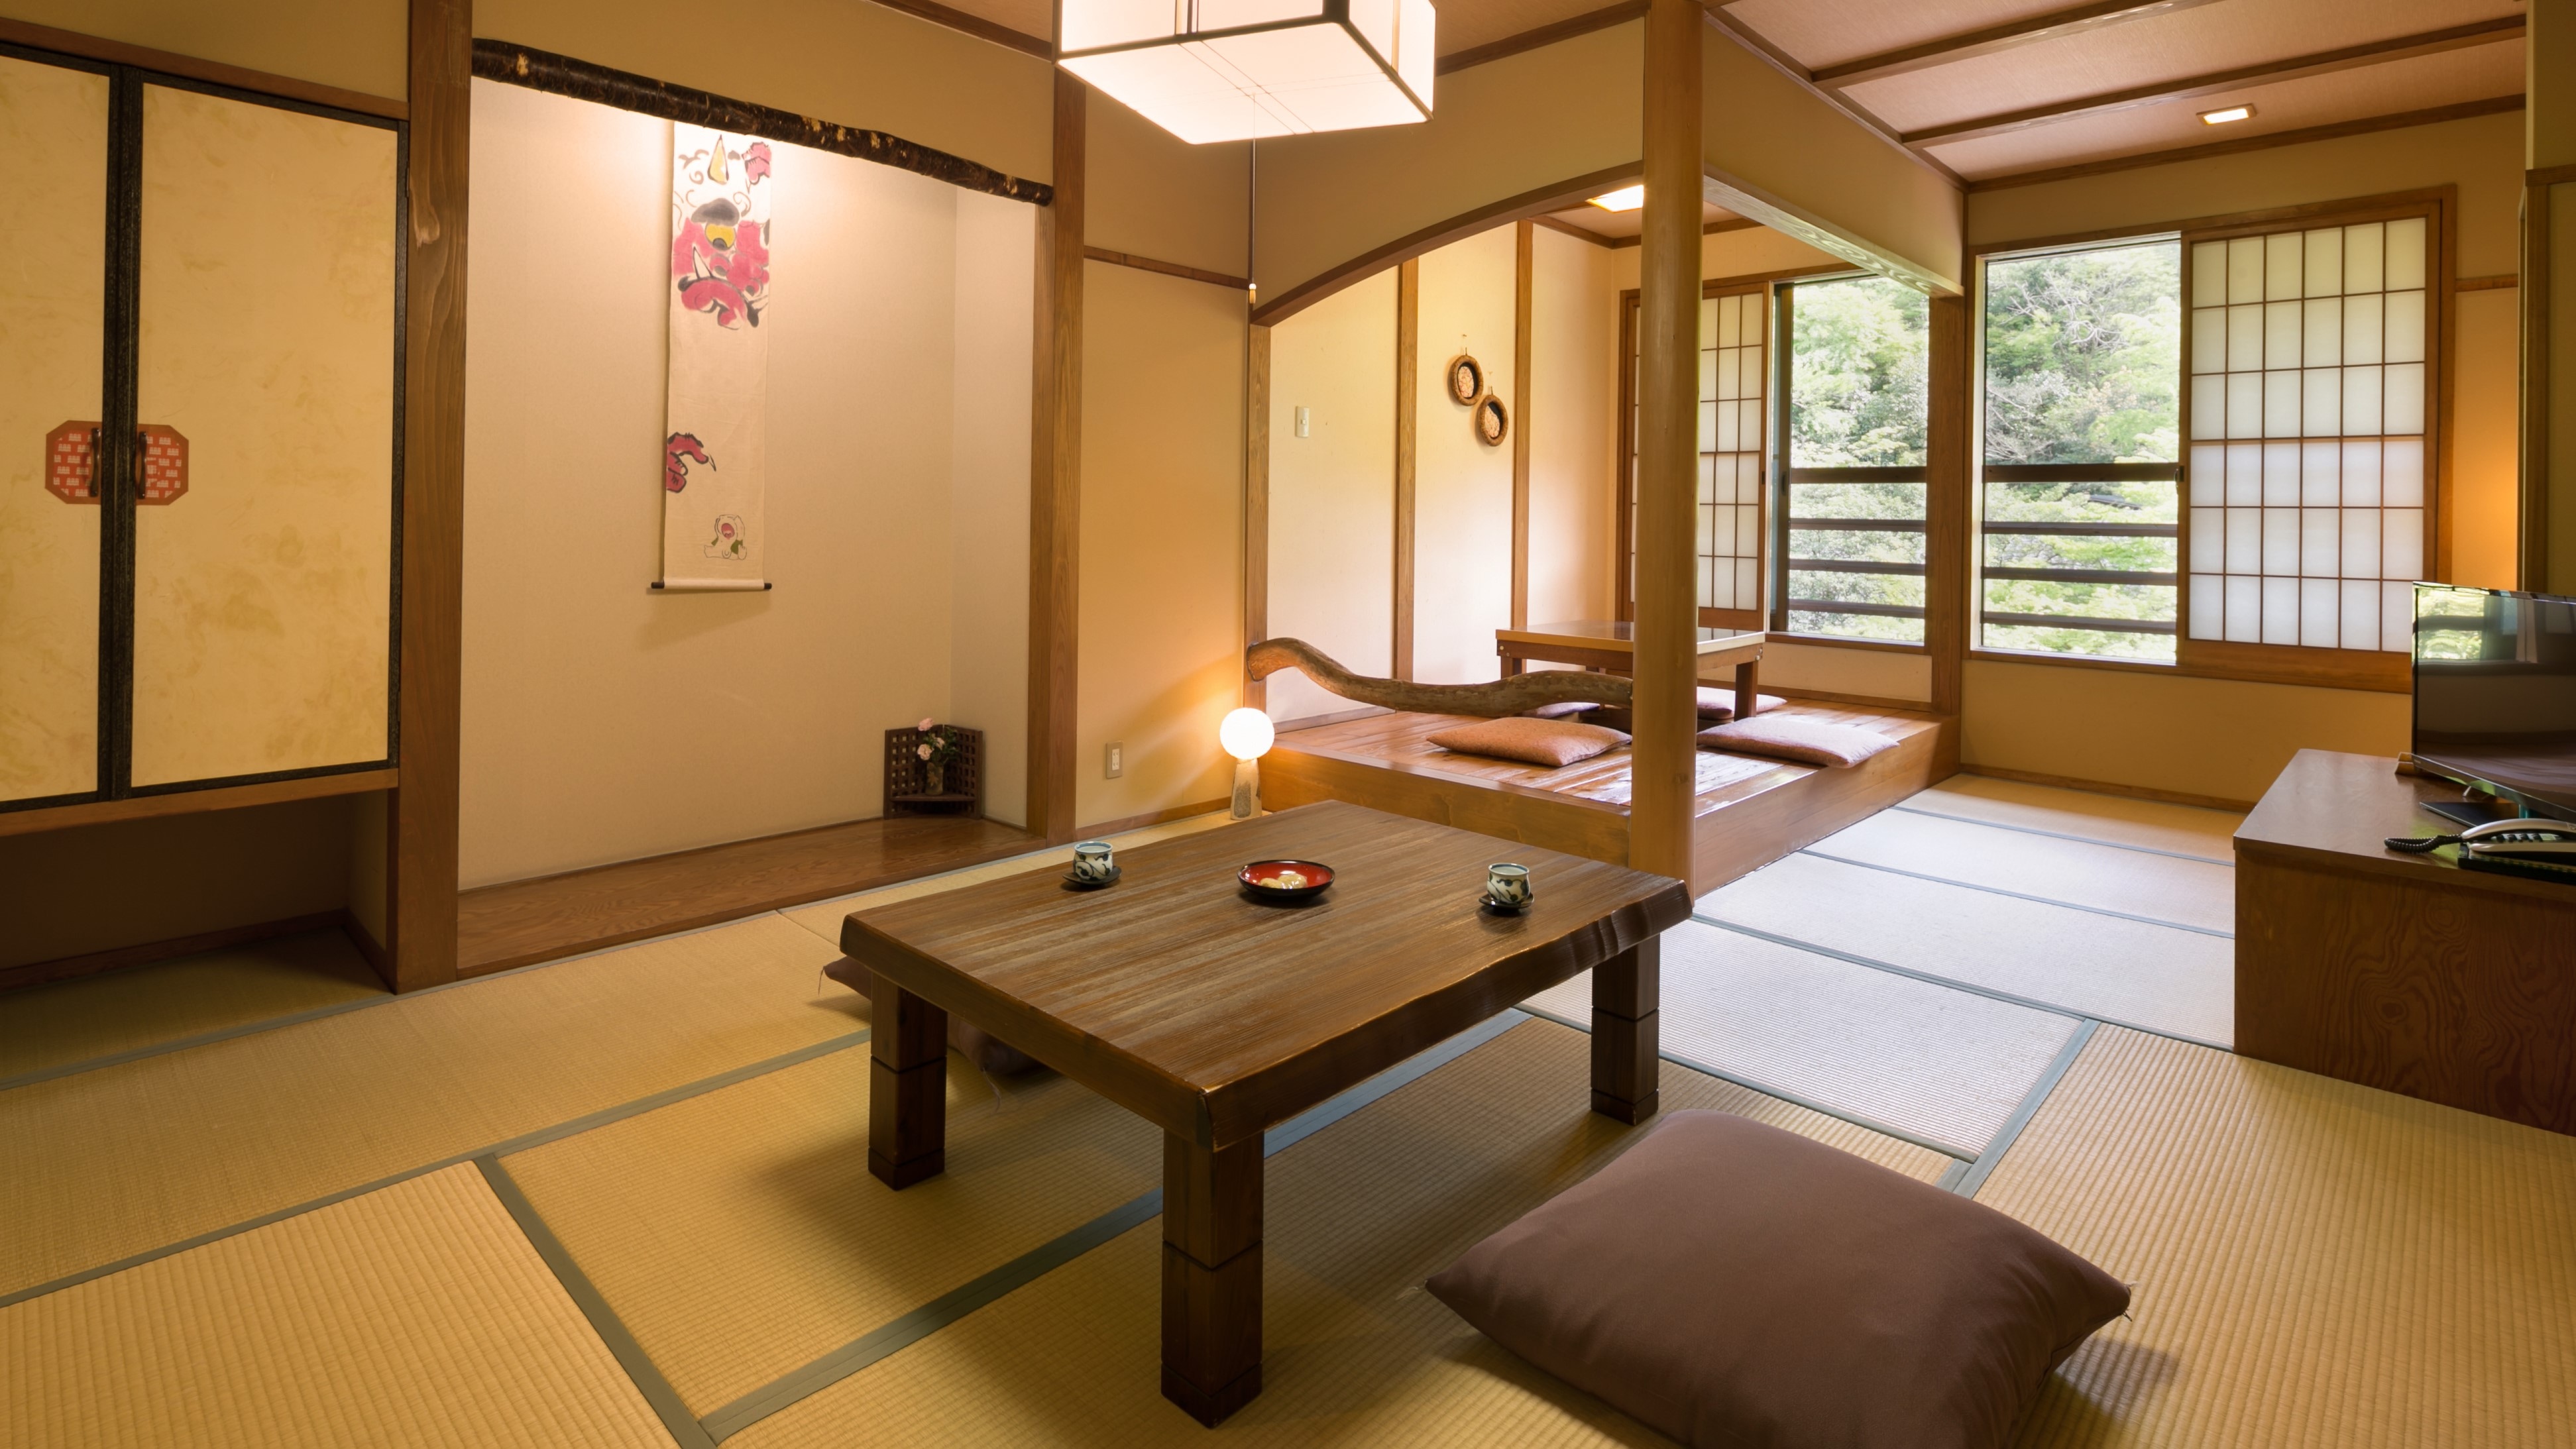 An example of a Japanese-style room with 8 tatami mats. This type has 3 rooms.